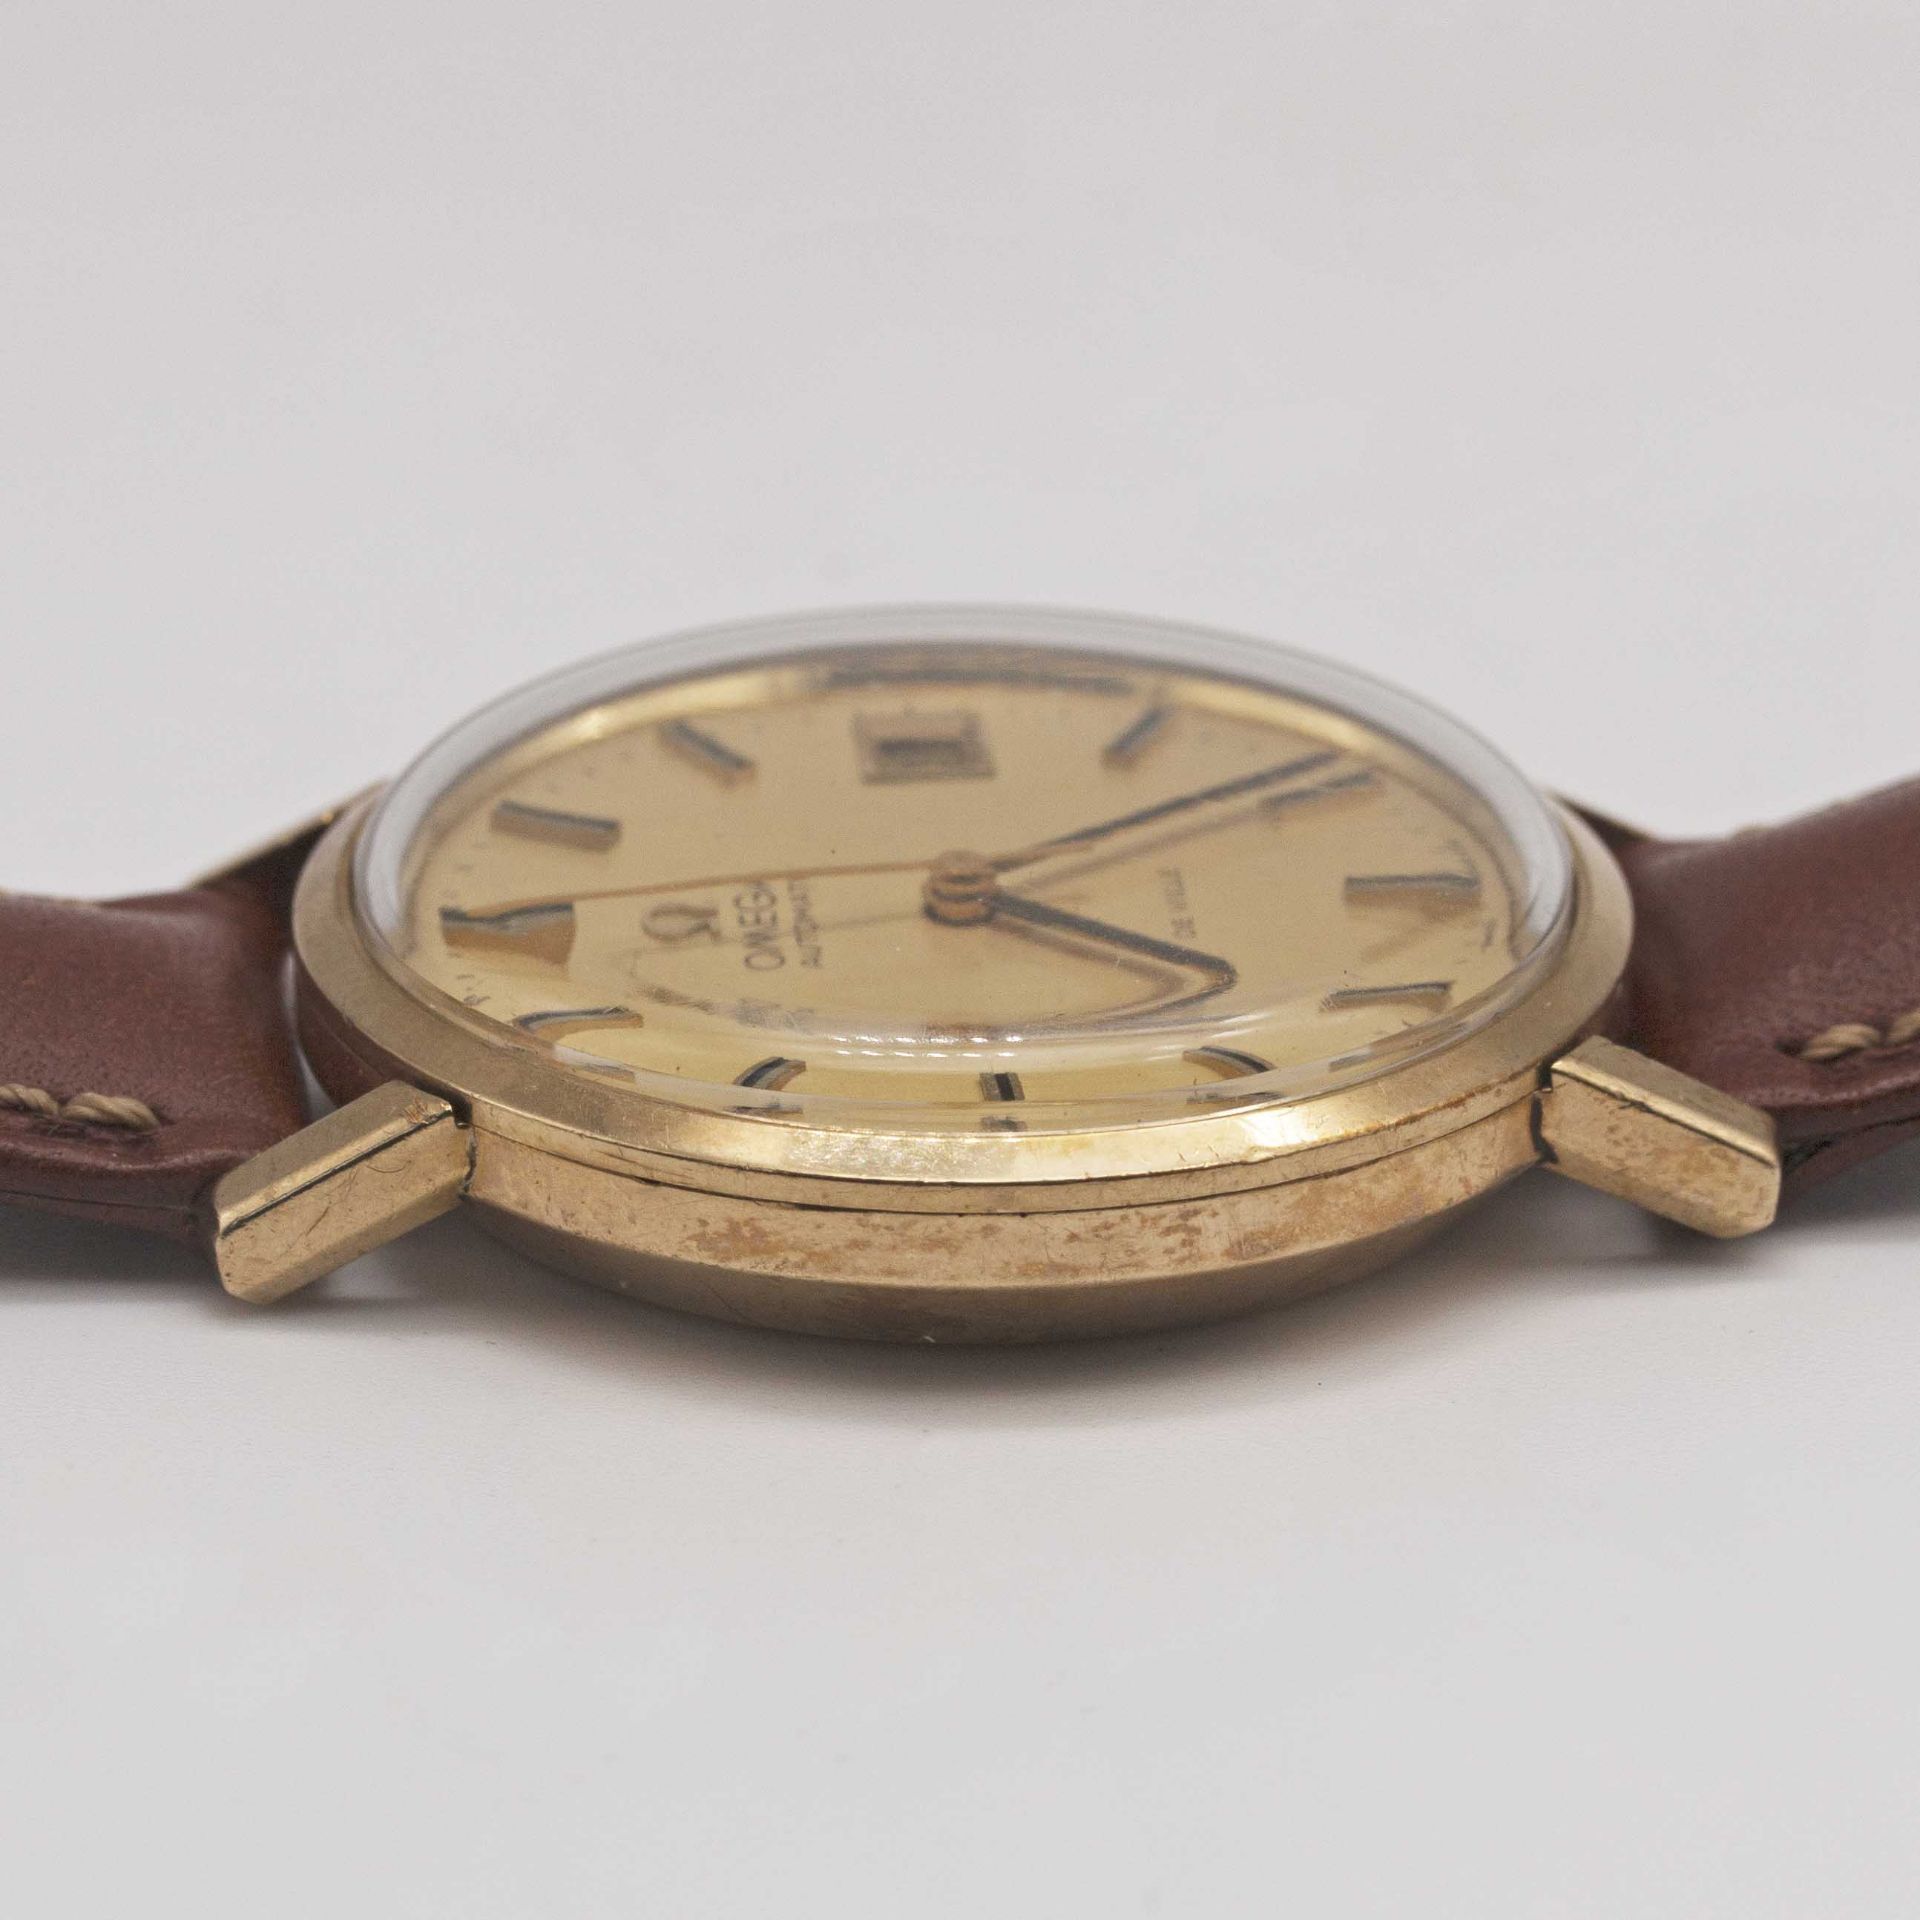 A GENTLEMAN'S 9CT SOLID GOLD OMEGA AUTOMATIC DE VILLE WRIST WATCH CIRCA 1973, REF. 166.5161 - Image 8 of 8